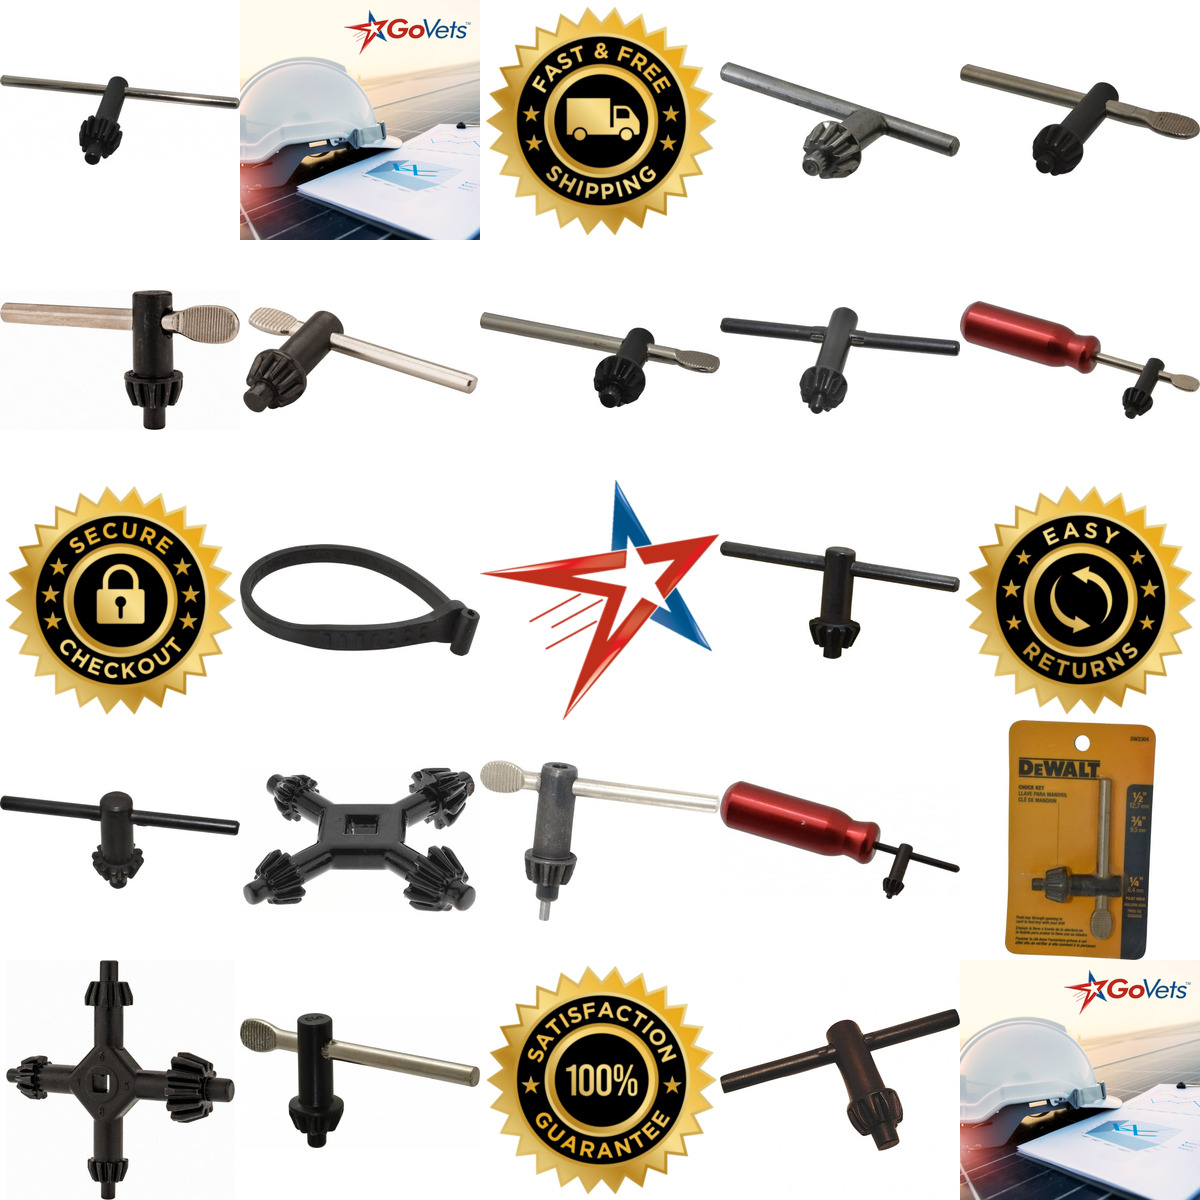 A selection of Drill Chuck Keys and Keyleashes products on GoVets